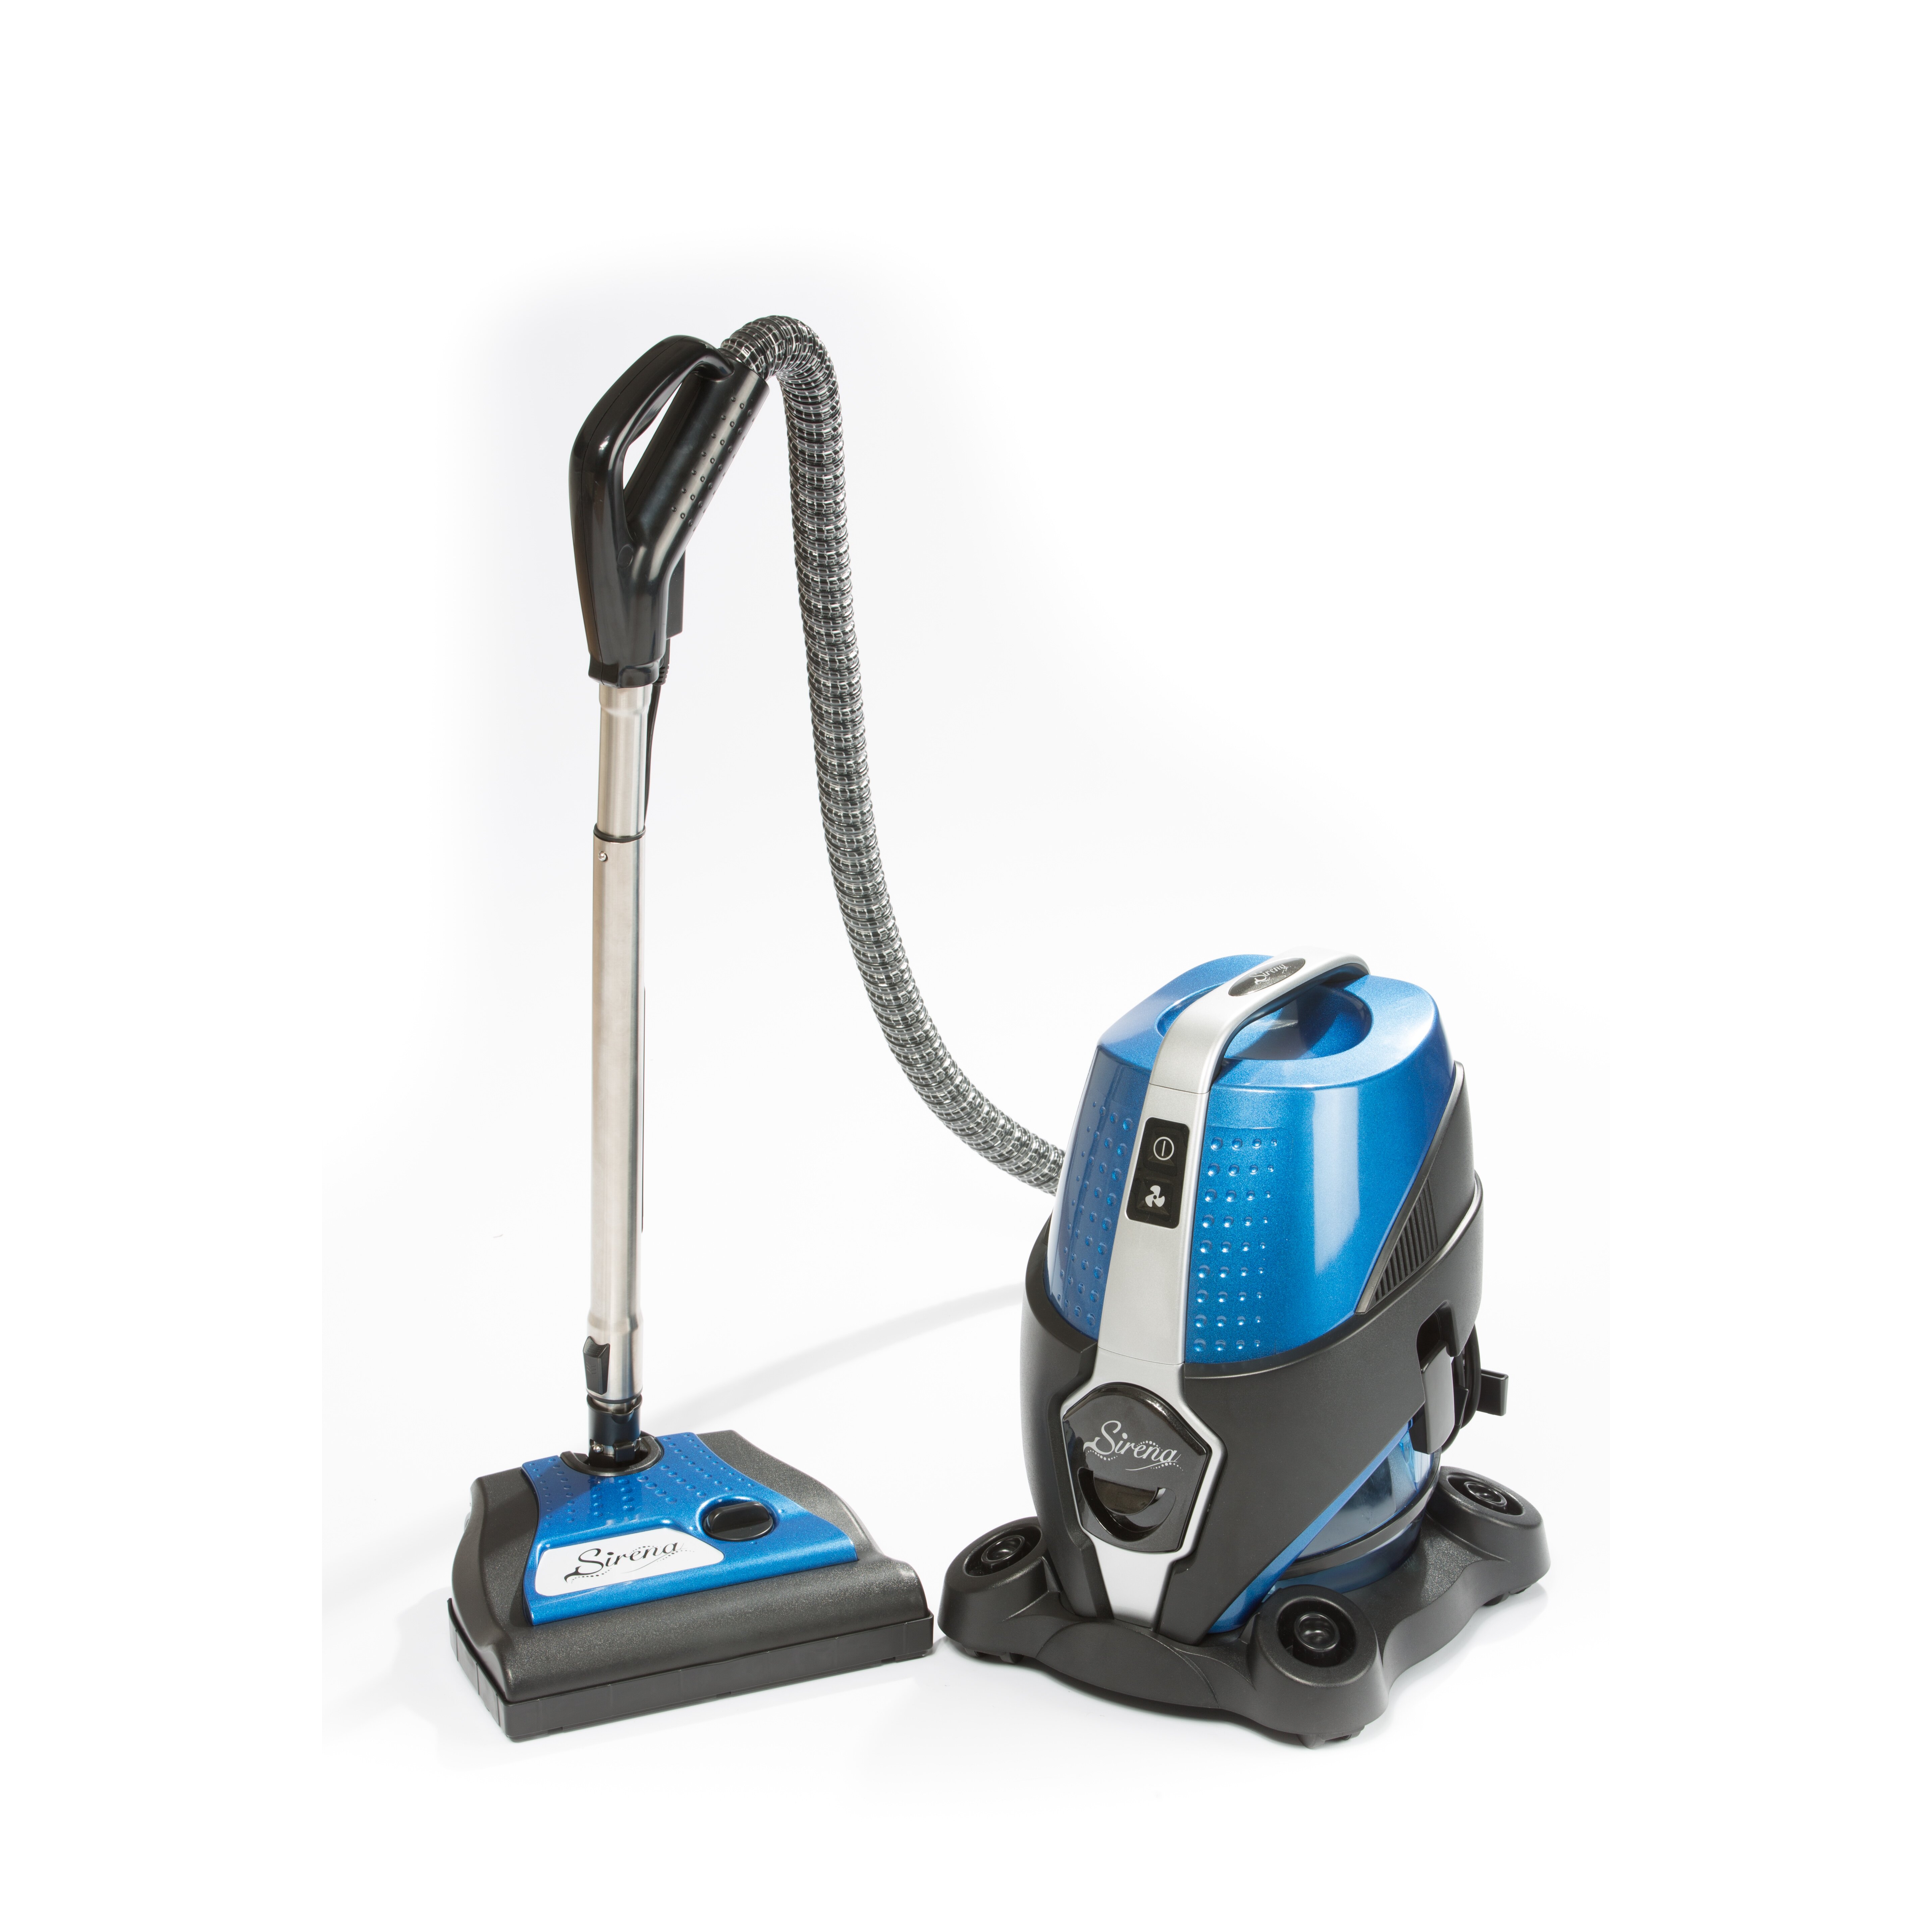 What's the Sirena Vacuum Cleaner best deal?